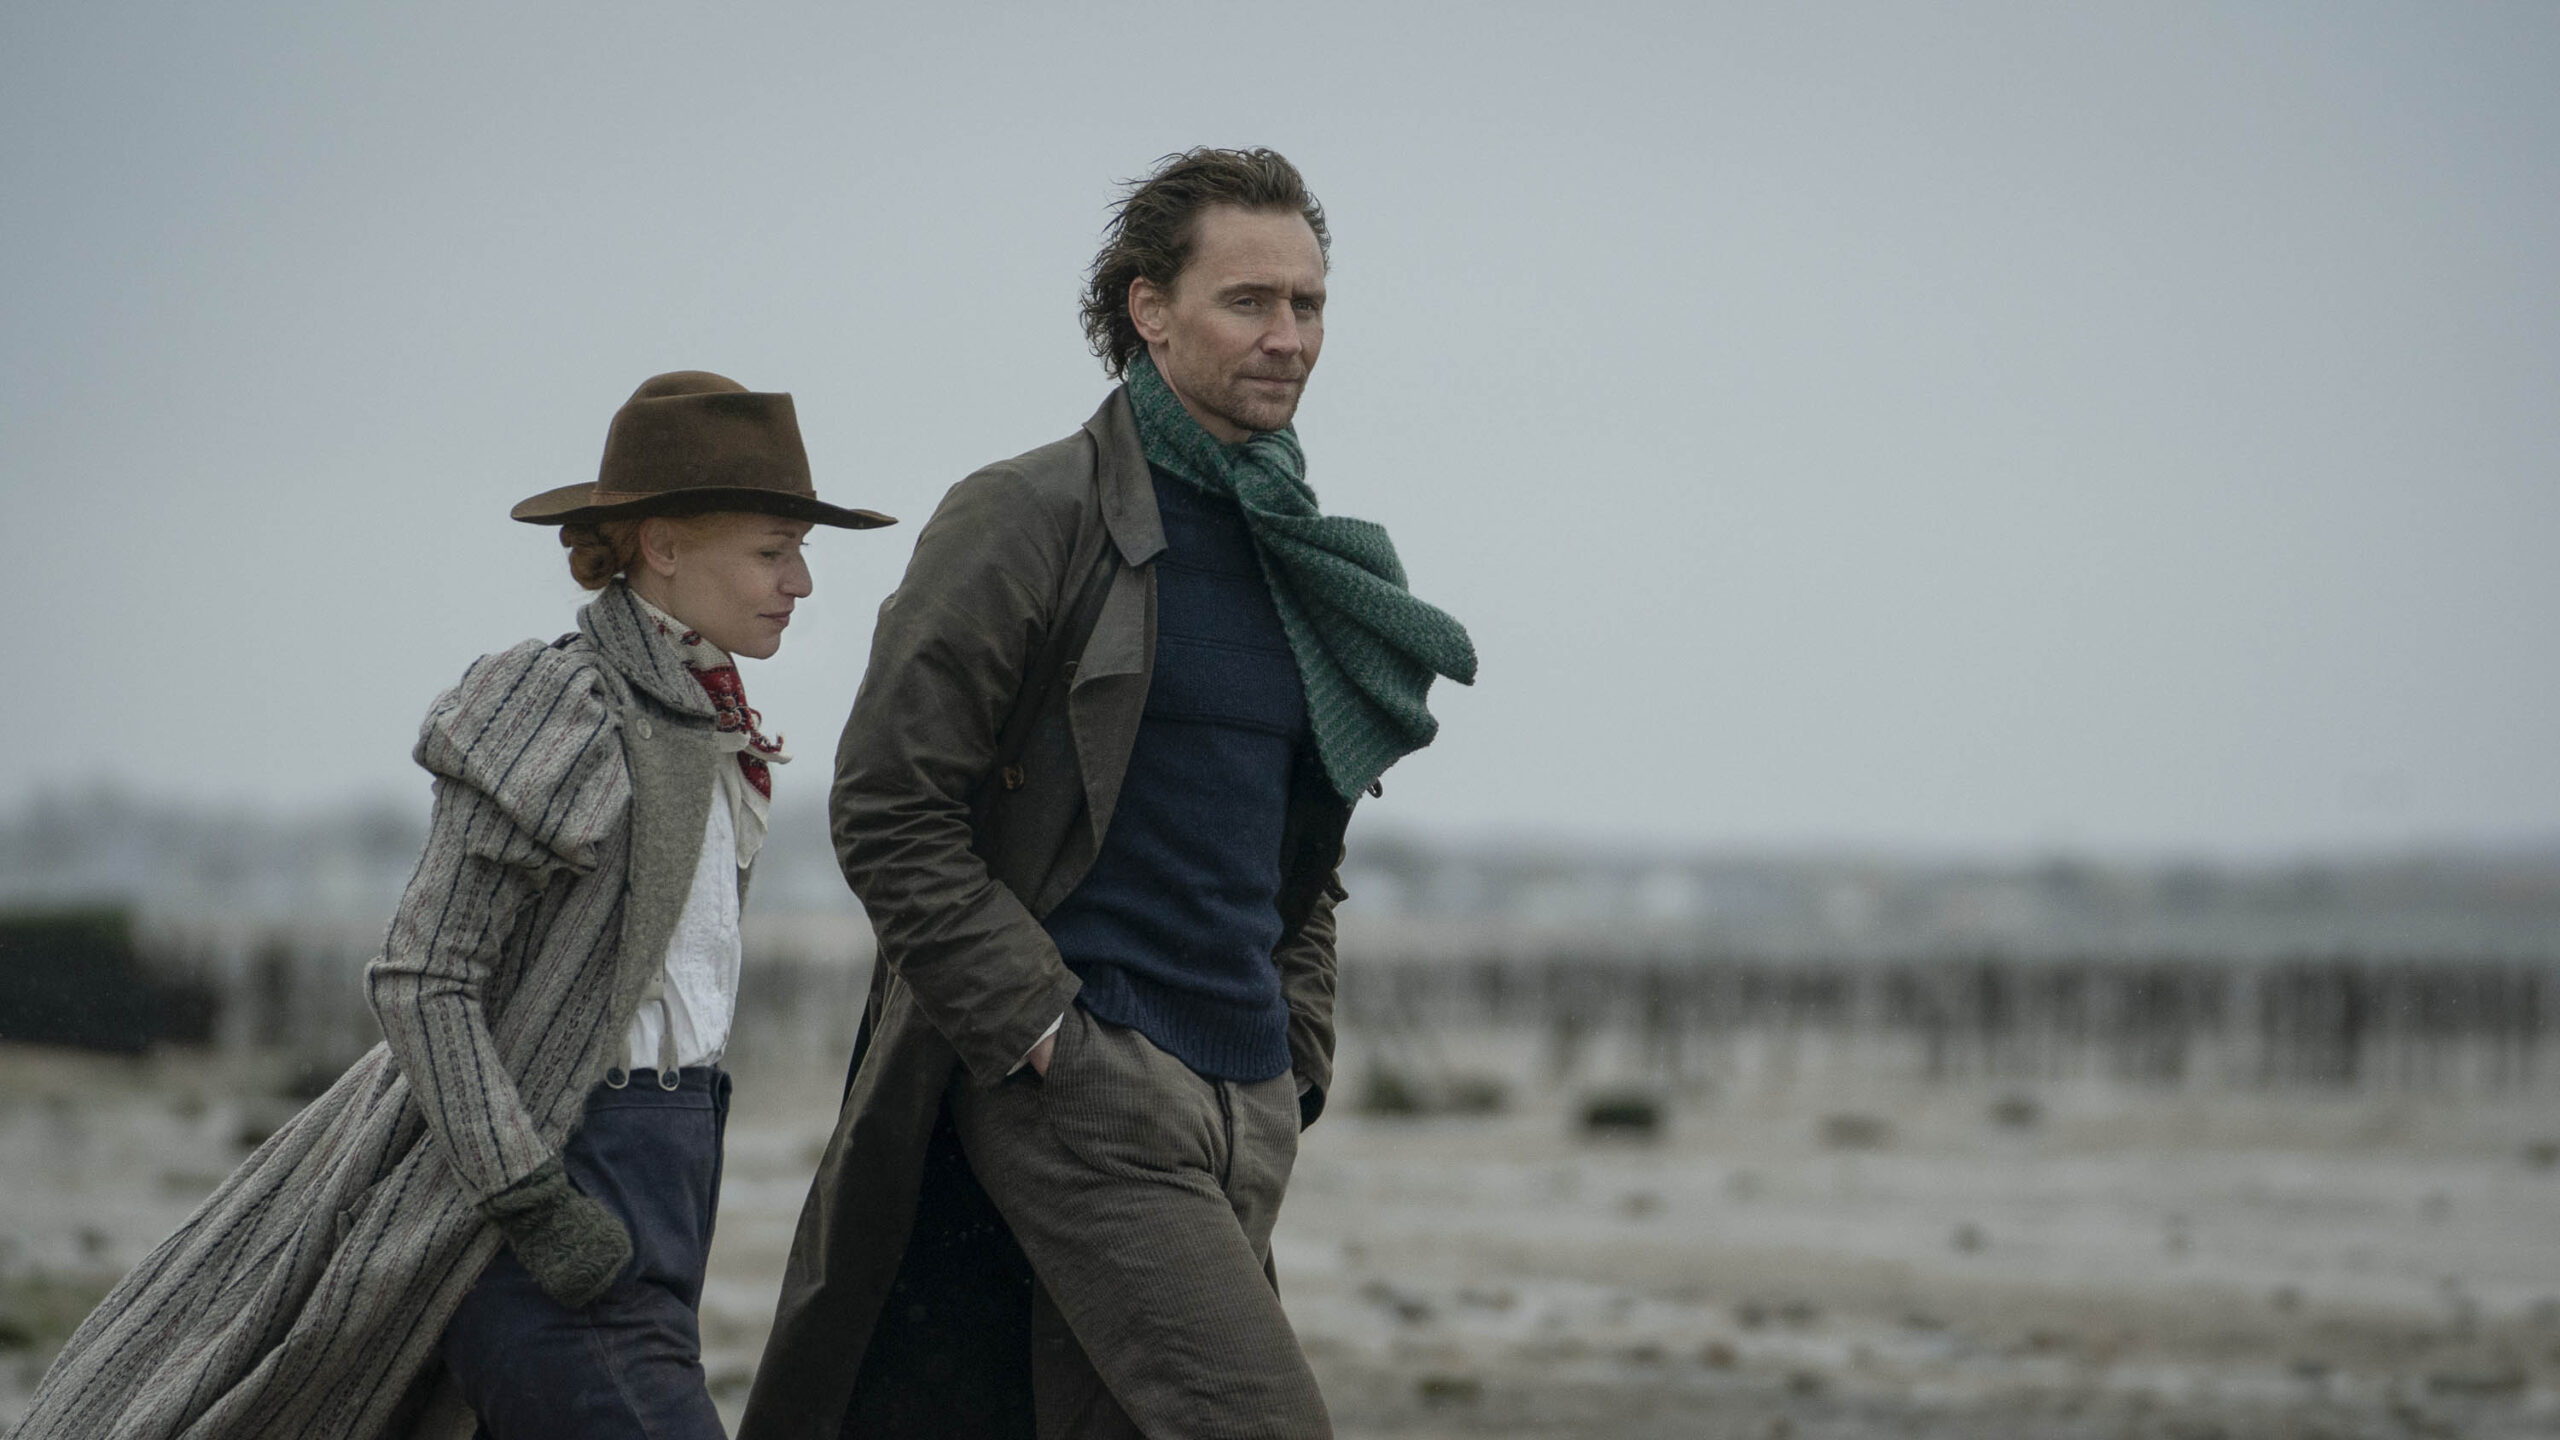 Claire Danes e Tom Hiddleston in The Essex Serpent 1x02 [credit: Dean Rogers; courtesy of Apple]